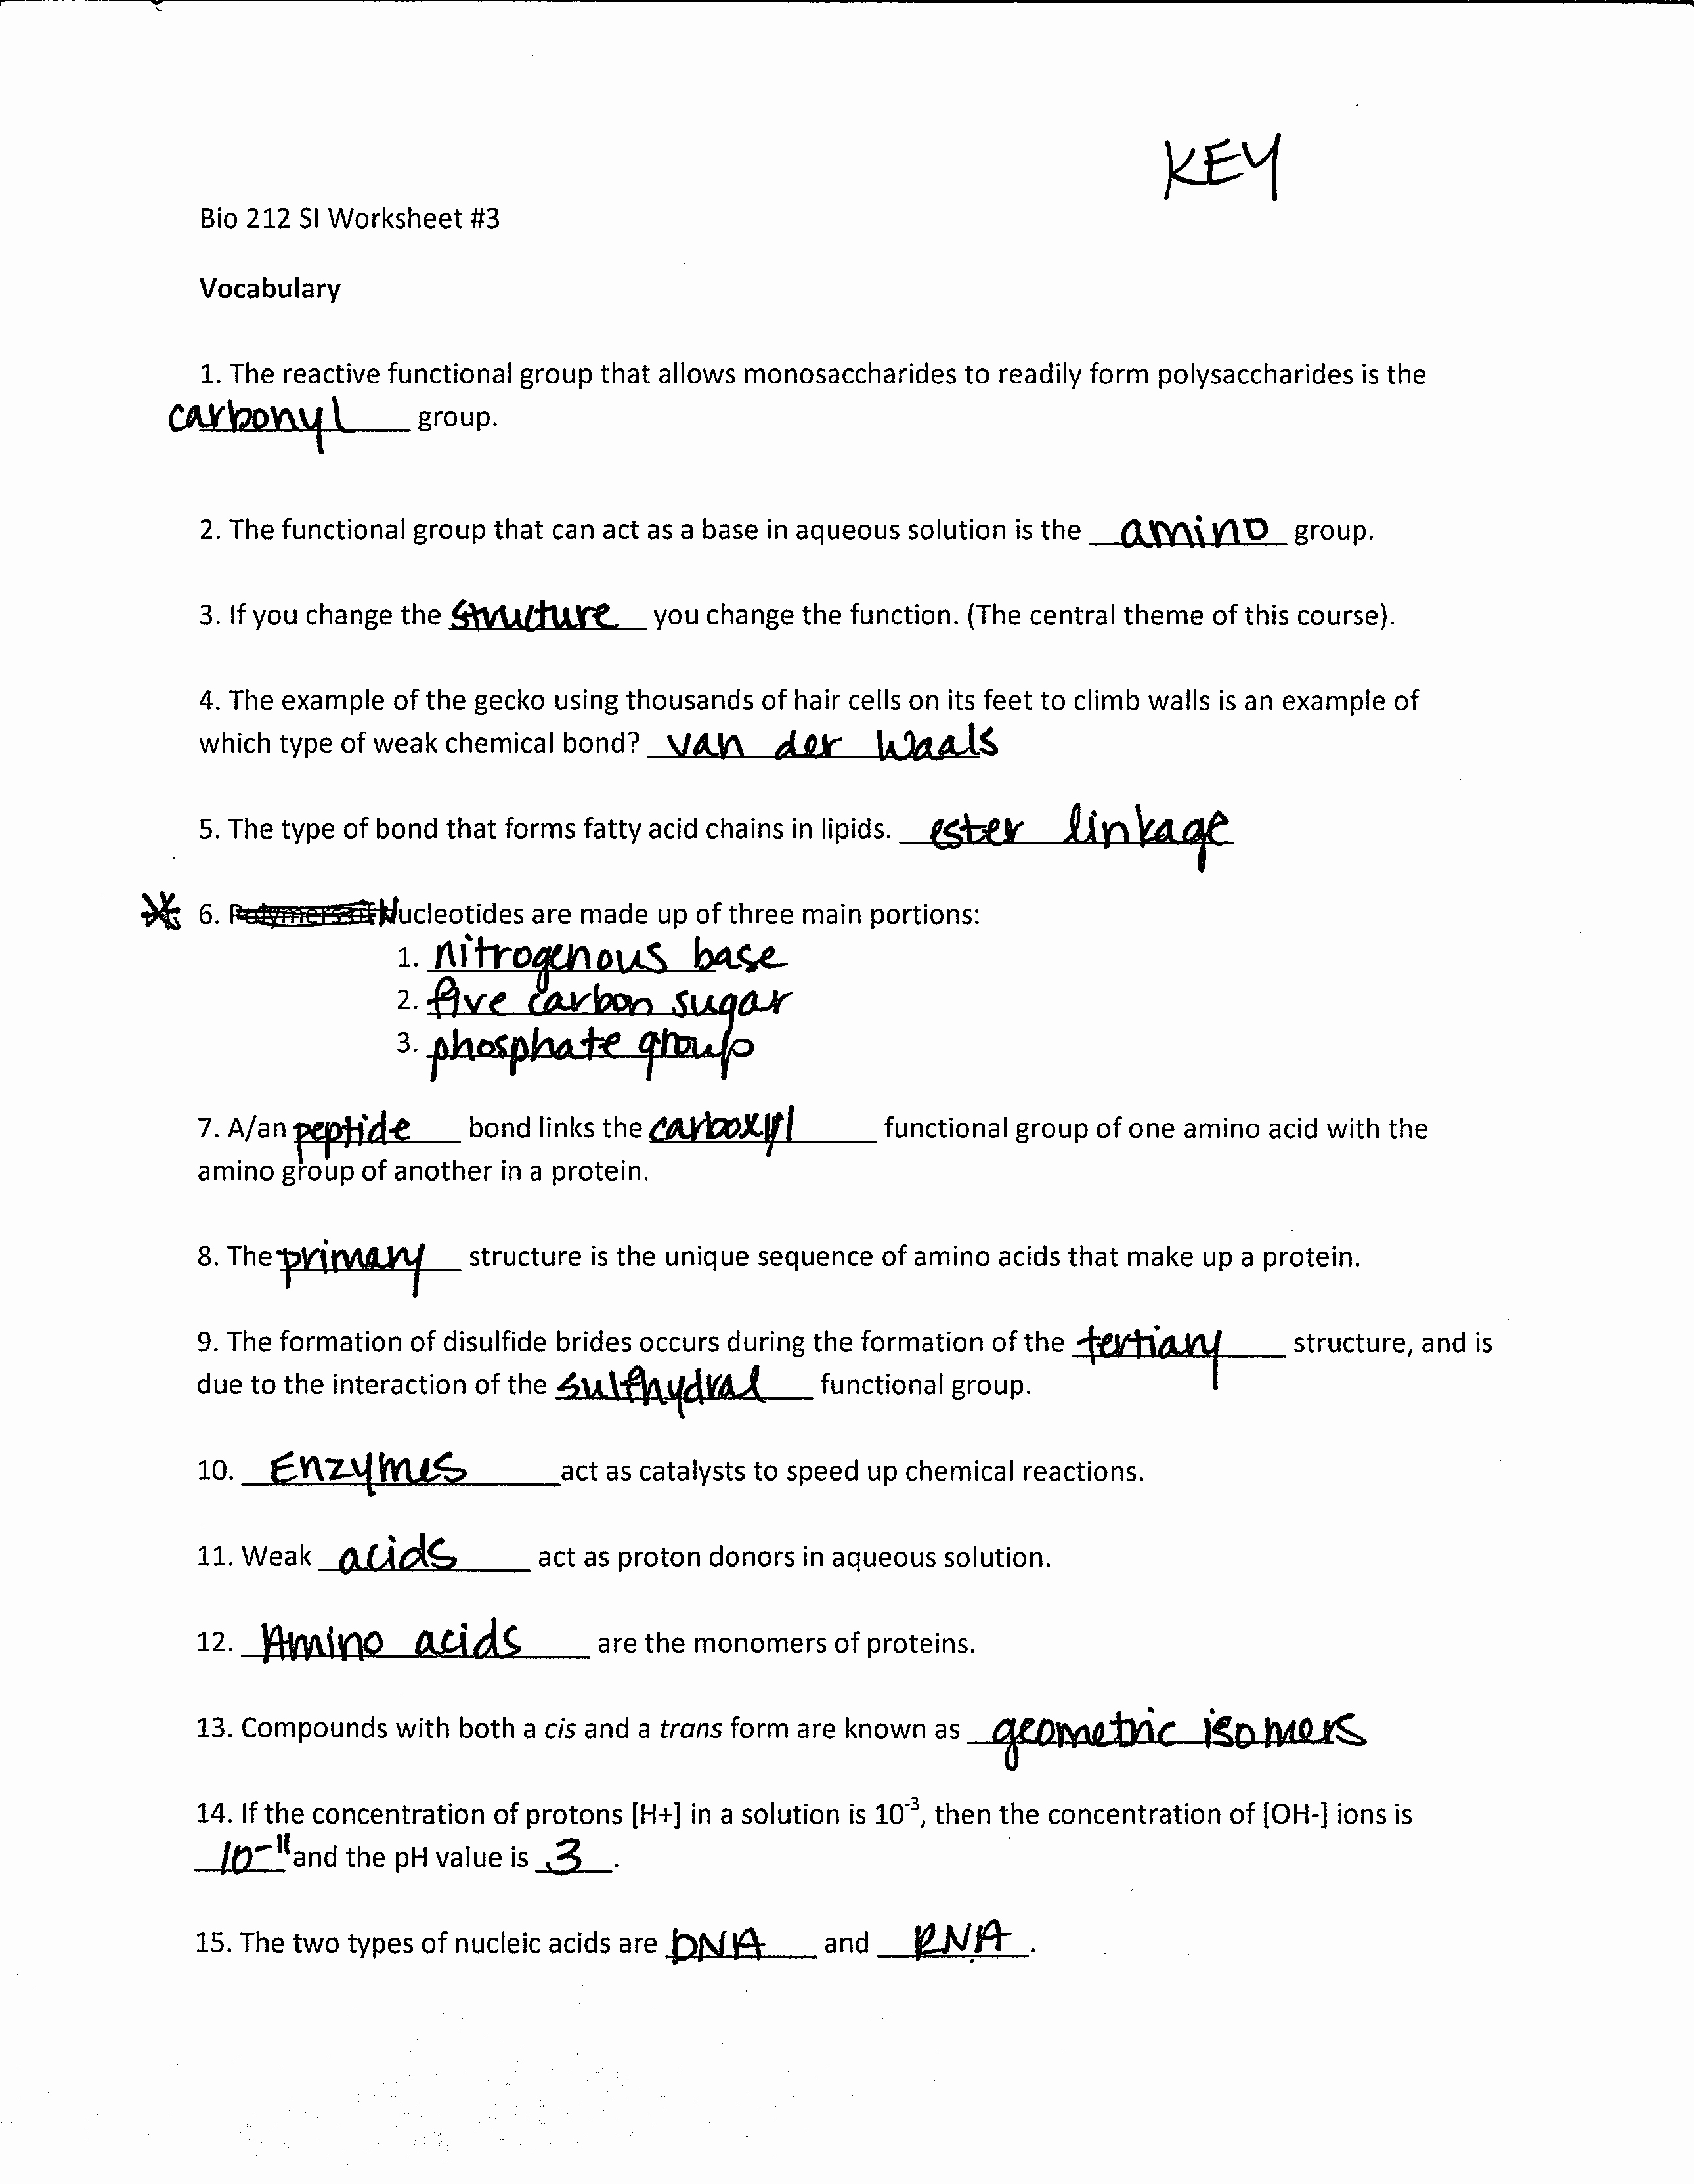 Dna Replication Coloring Worksheet Awesome 13 Best Of 12 2 the Structure Dna Worksheet